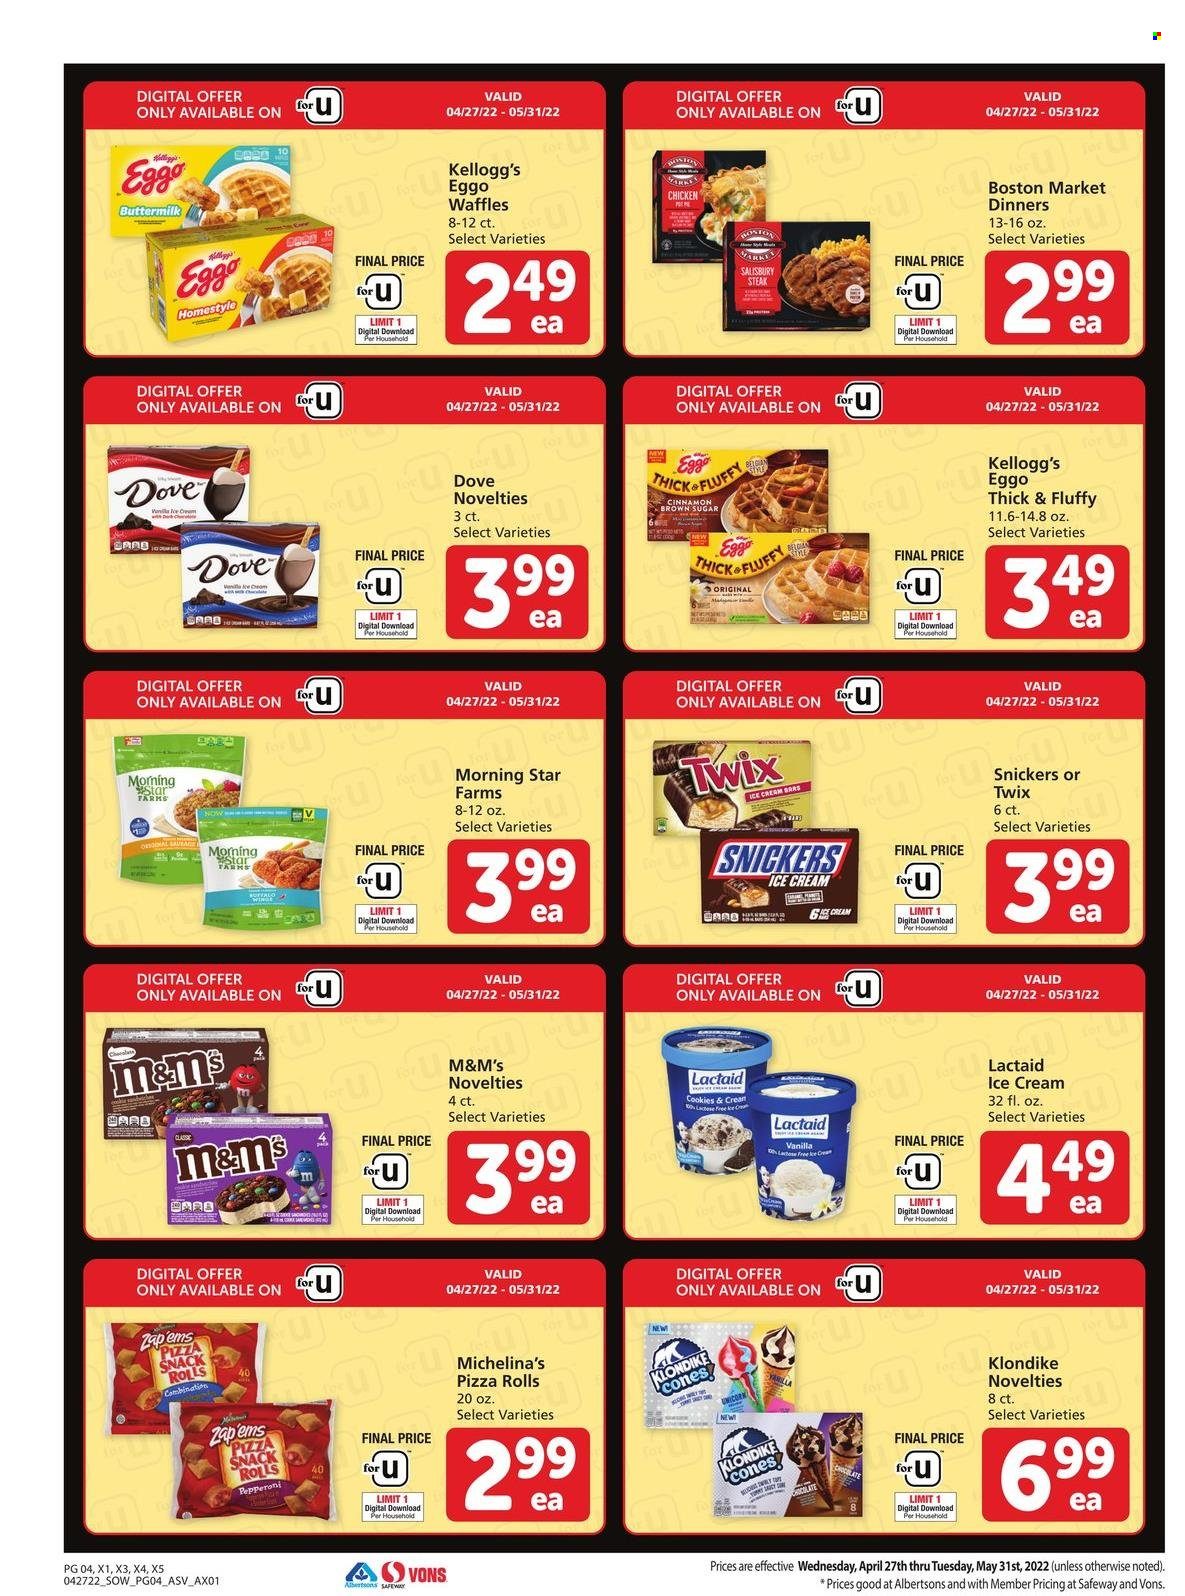 thumbnail - Safeway Flyer - 04/27/2022 - 05/31/2022 - Sales products - pizza rolls, waffles, steak, pizza, pepperoni, Lactaid, buttermilk, eggs, ice cream, cookies, snack, Snickers, Twix, M&M's, Kellogg's, cane sugar, cinnamon, L'Or, Dove. Page 4.